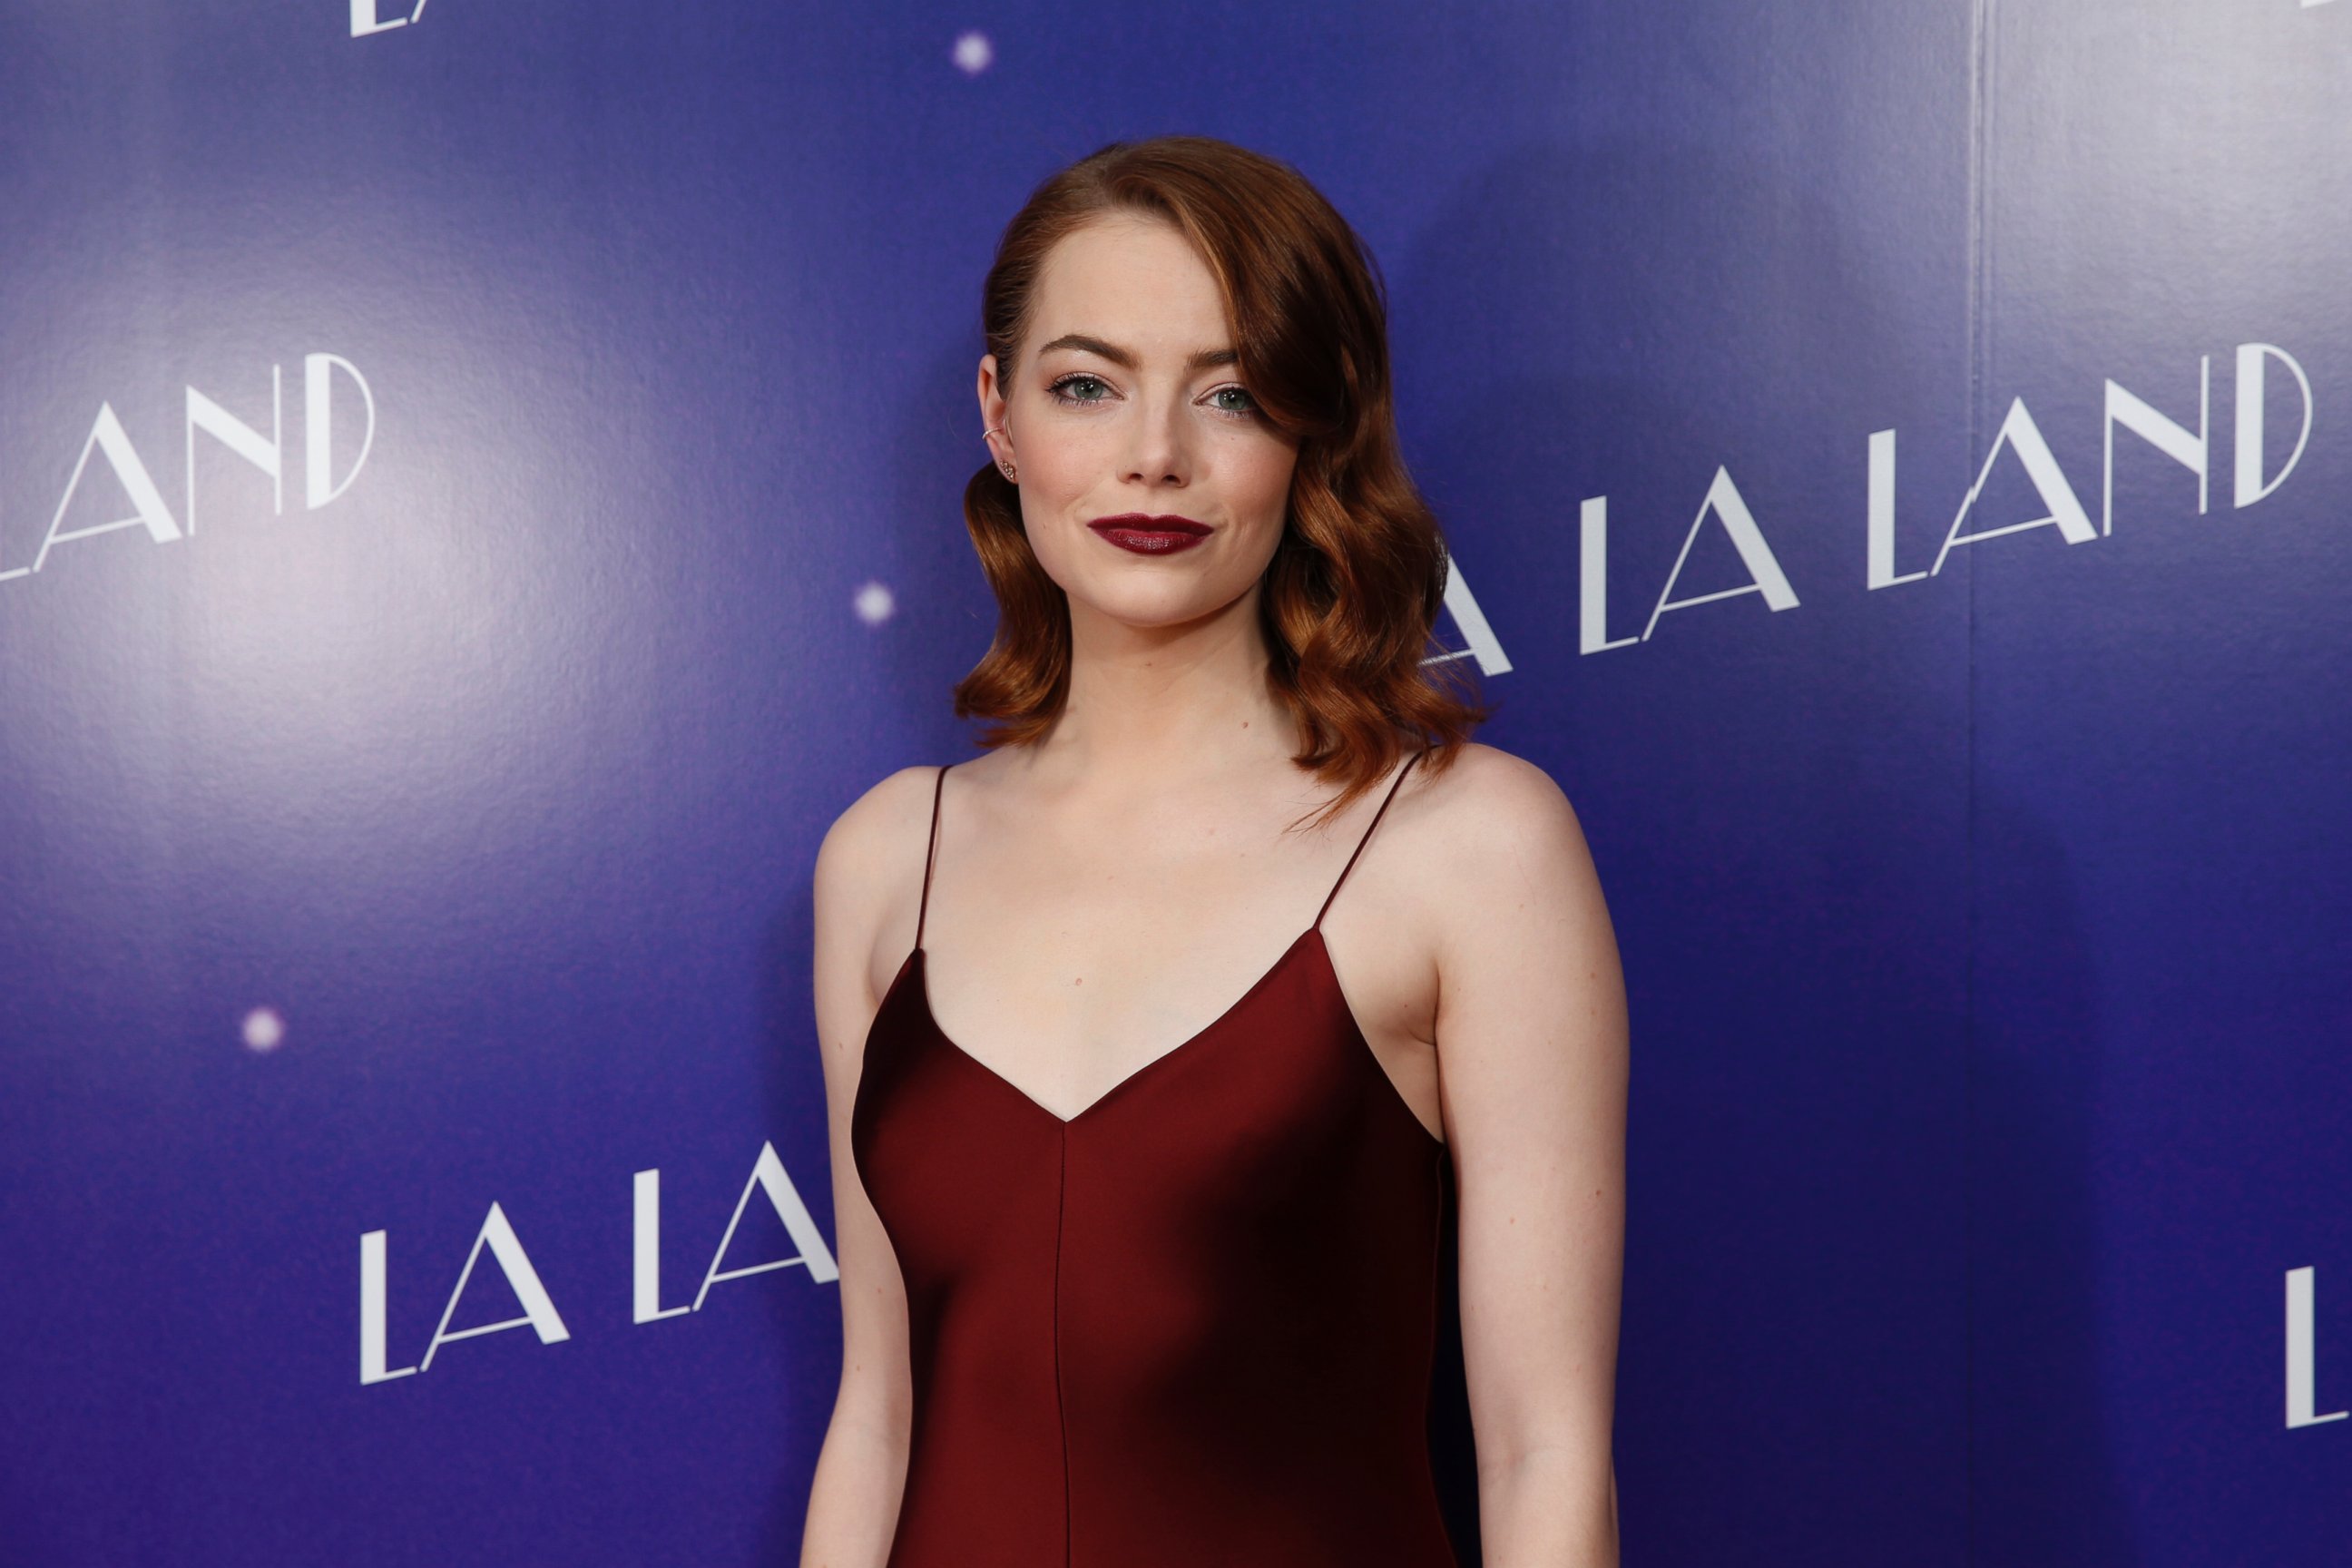 PHOTO: Actress Emma Stone poses for photographers upon arrival at the screening of the film "La La Land" in London, Jan. 12, 2017.